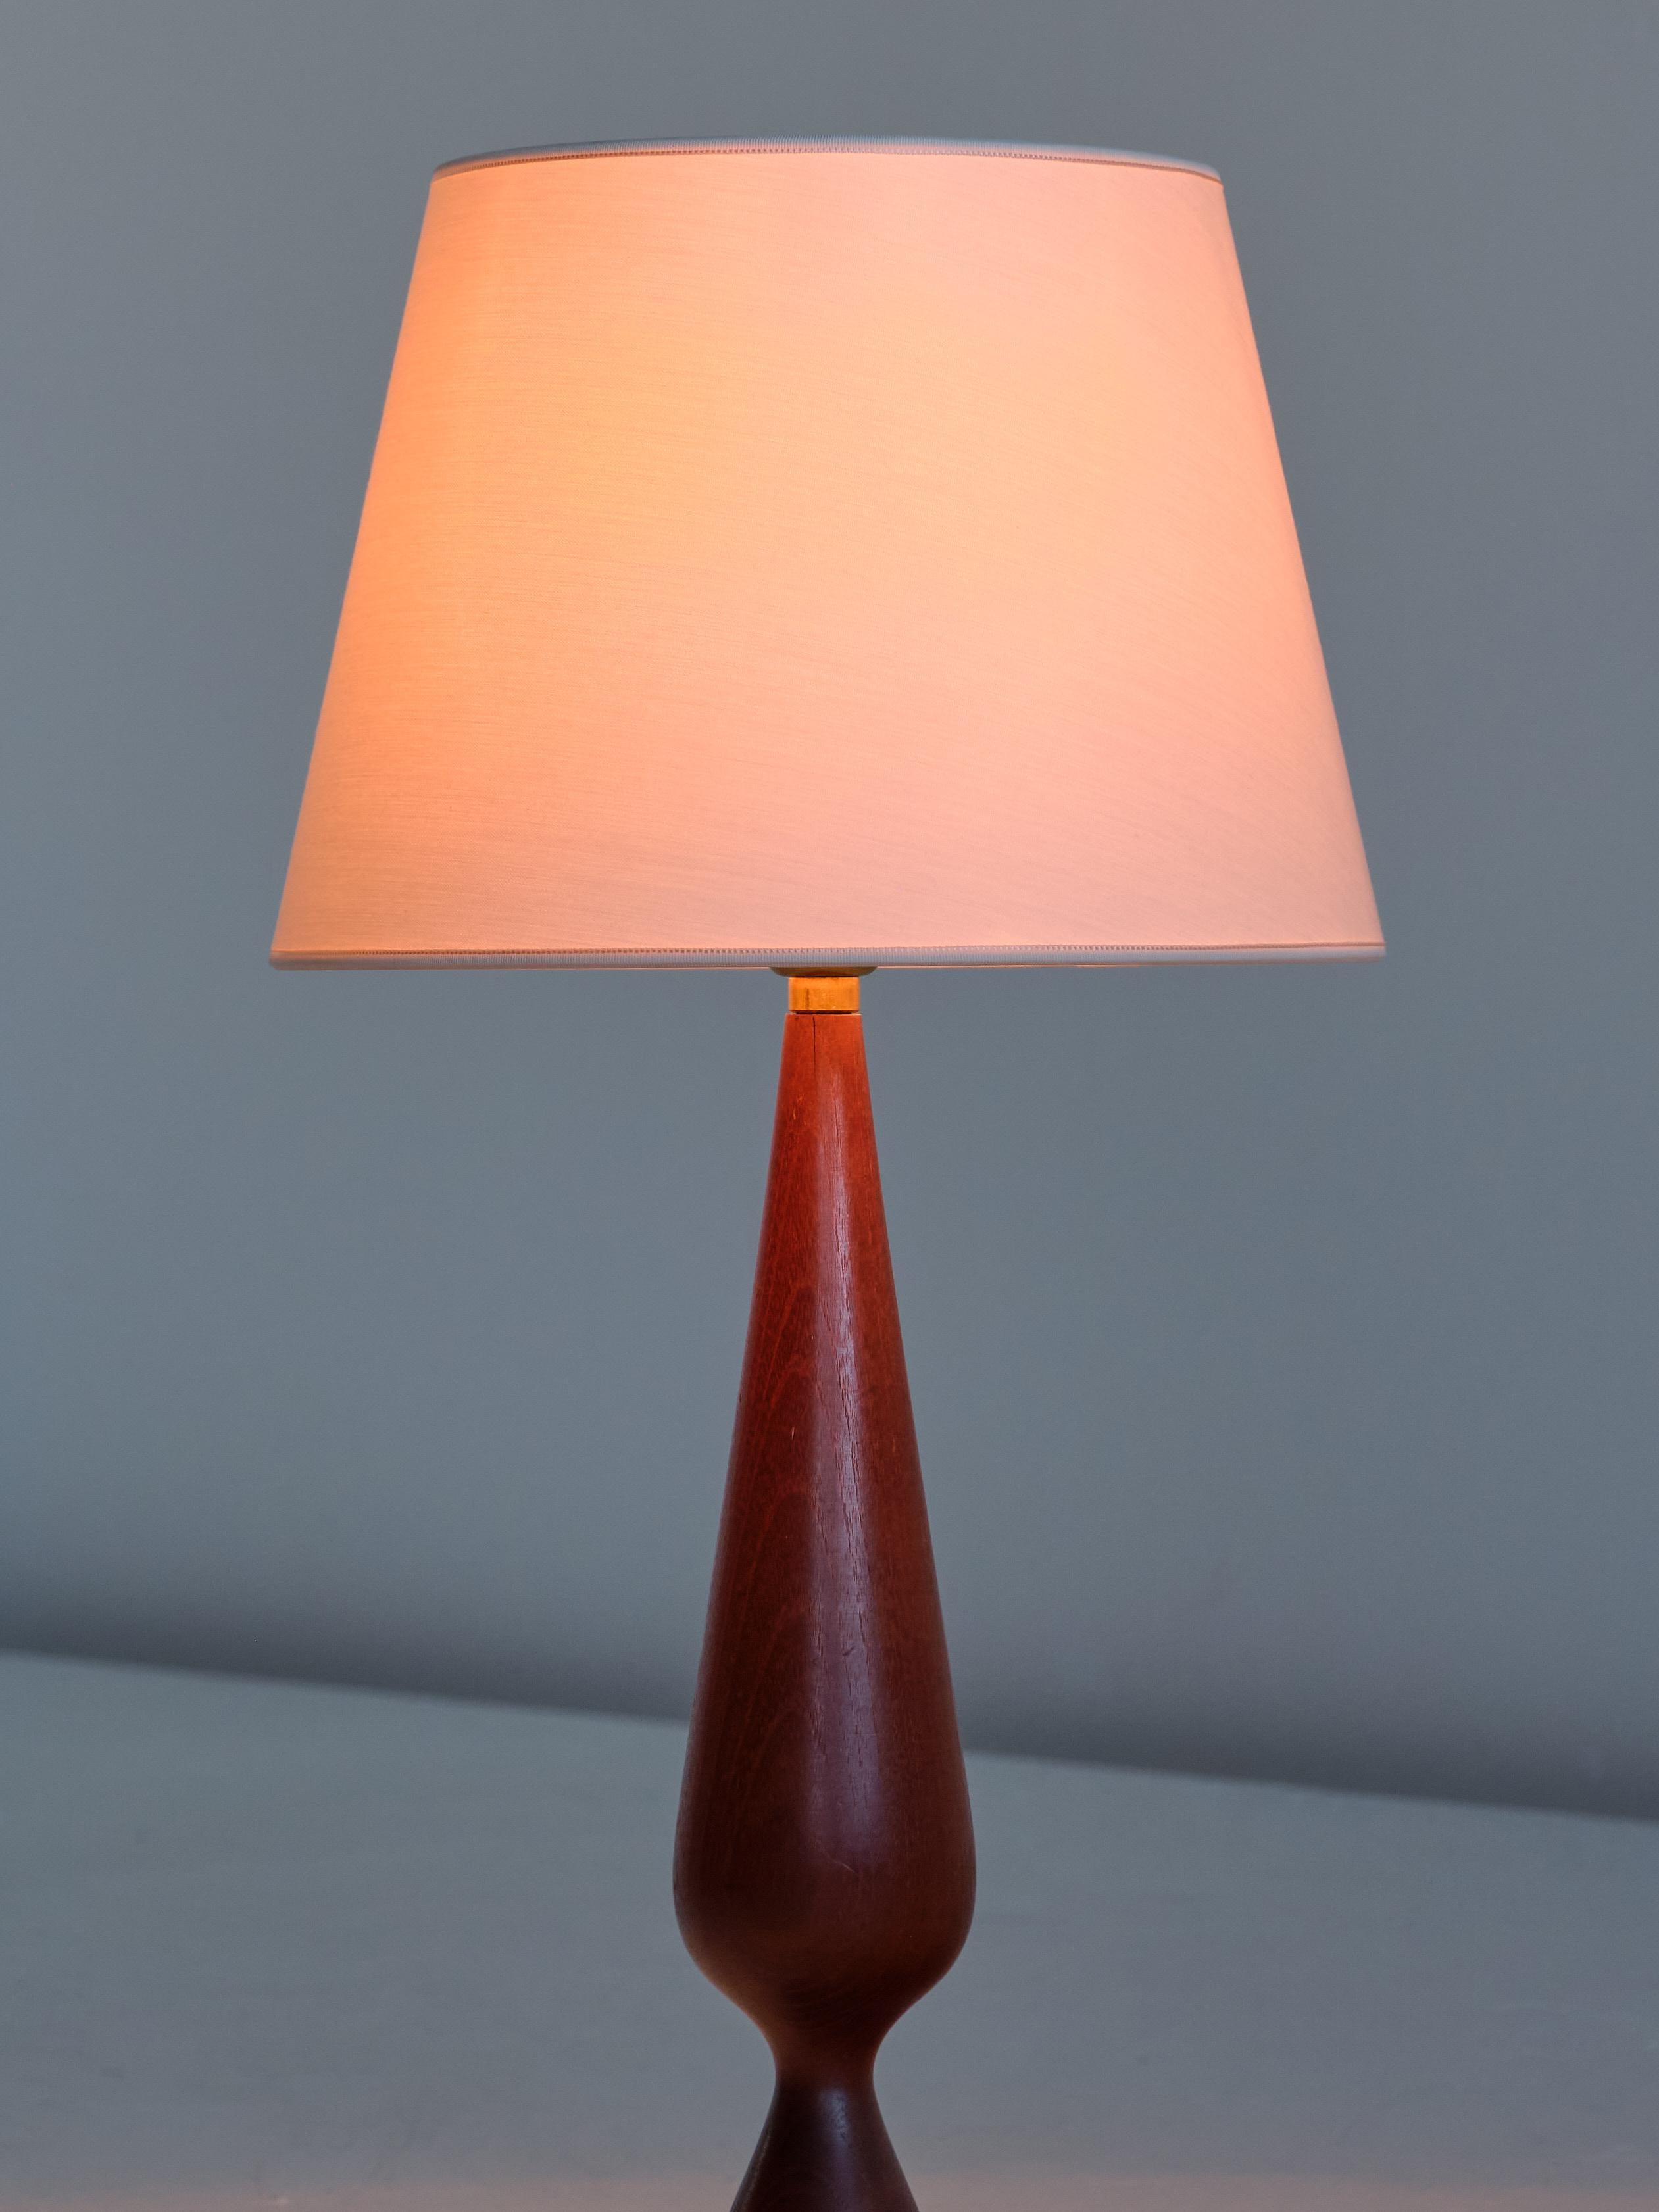 Fabric Sculptural Table Lamp in Teak Wood and Ivory Drum Shade, Denmark, 1960s For Sale